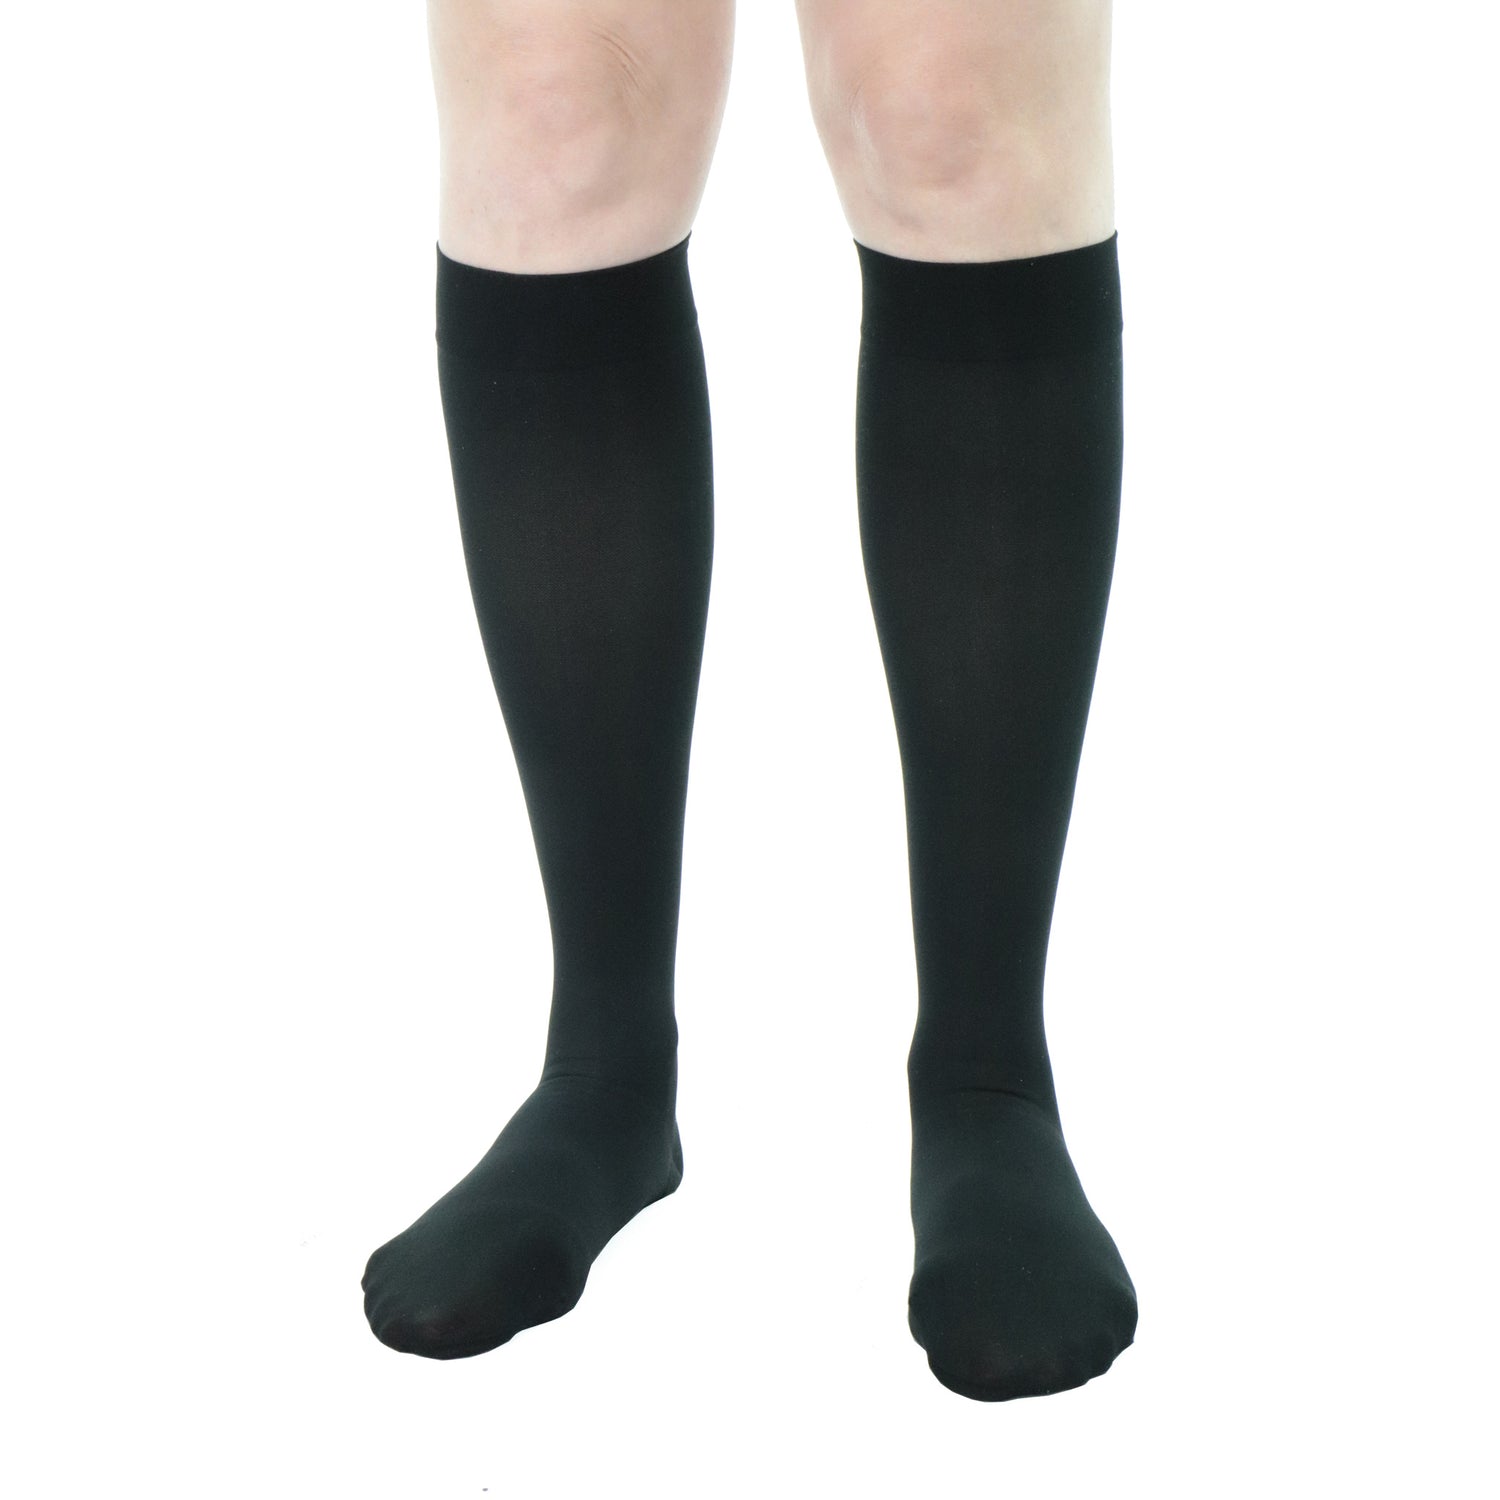 Doctor Brace Circutrend 30-40 mmHg women compression stockings calf closed toe black front view